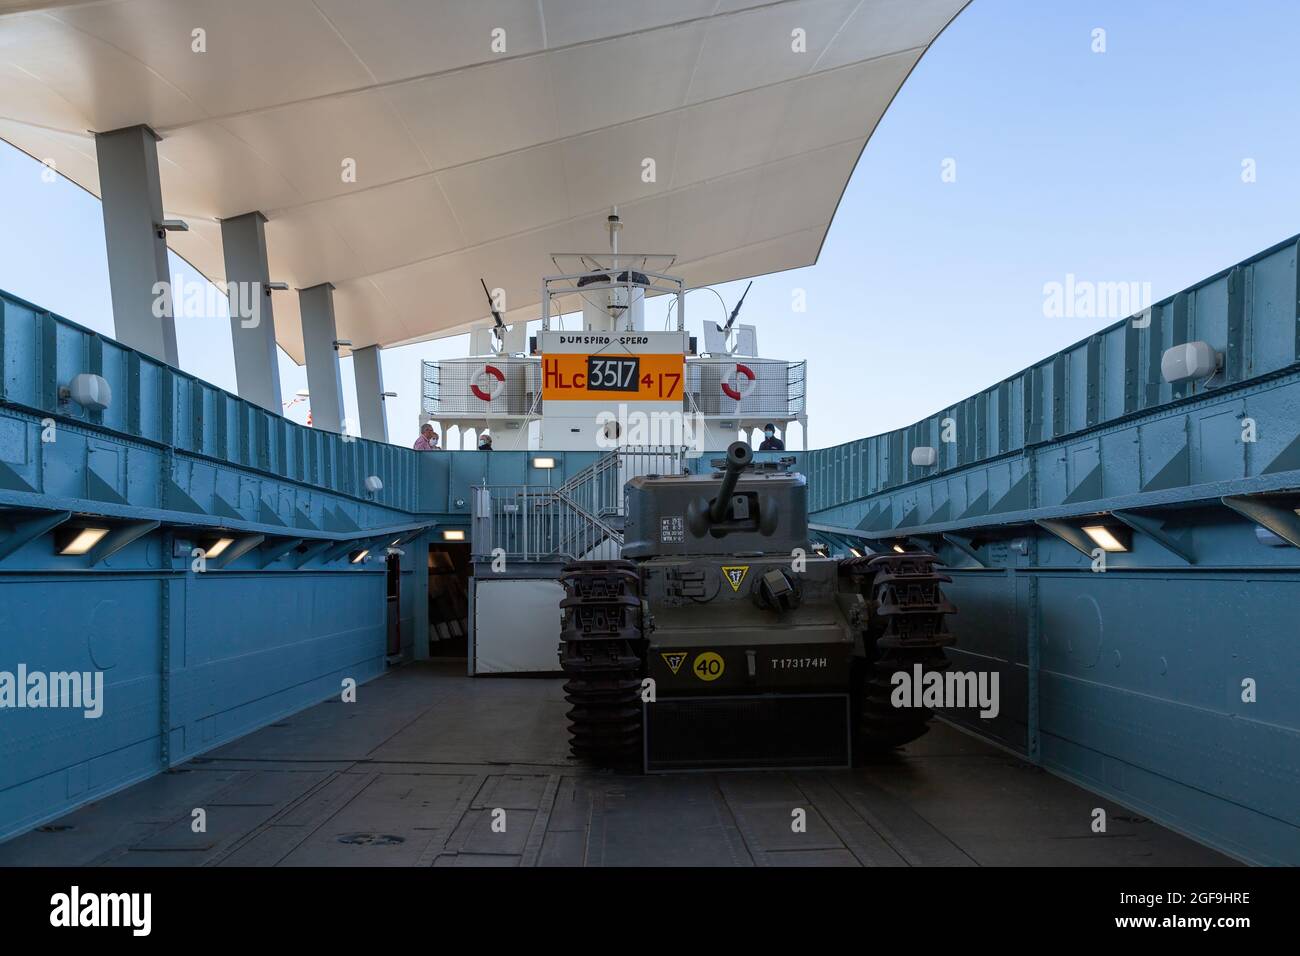 08-24-2021 Portsmouth, Hampshire, UK, A tank on the deck of the inside of LCT 7074 D-Day landing craft at the D-Day story museum in southsea UK Stock Photo